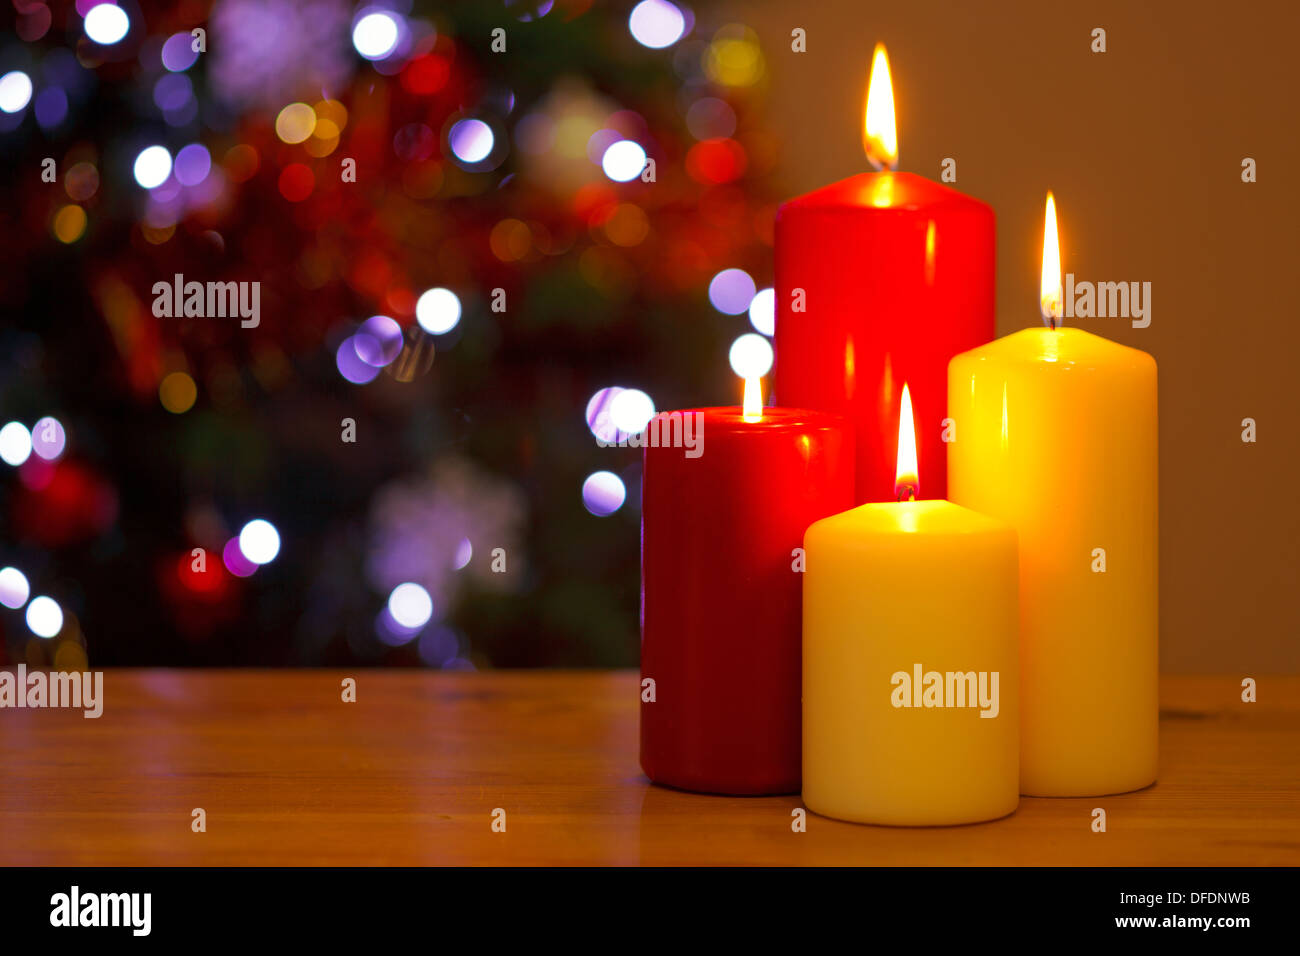 Four candles burning with the out of focus lights from a Christmas tree behind. Stock Photo